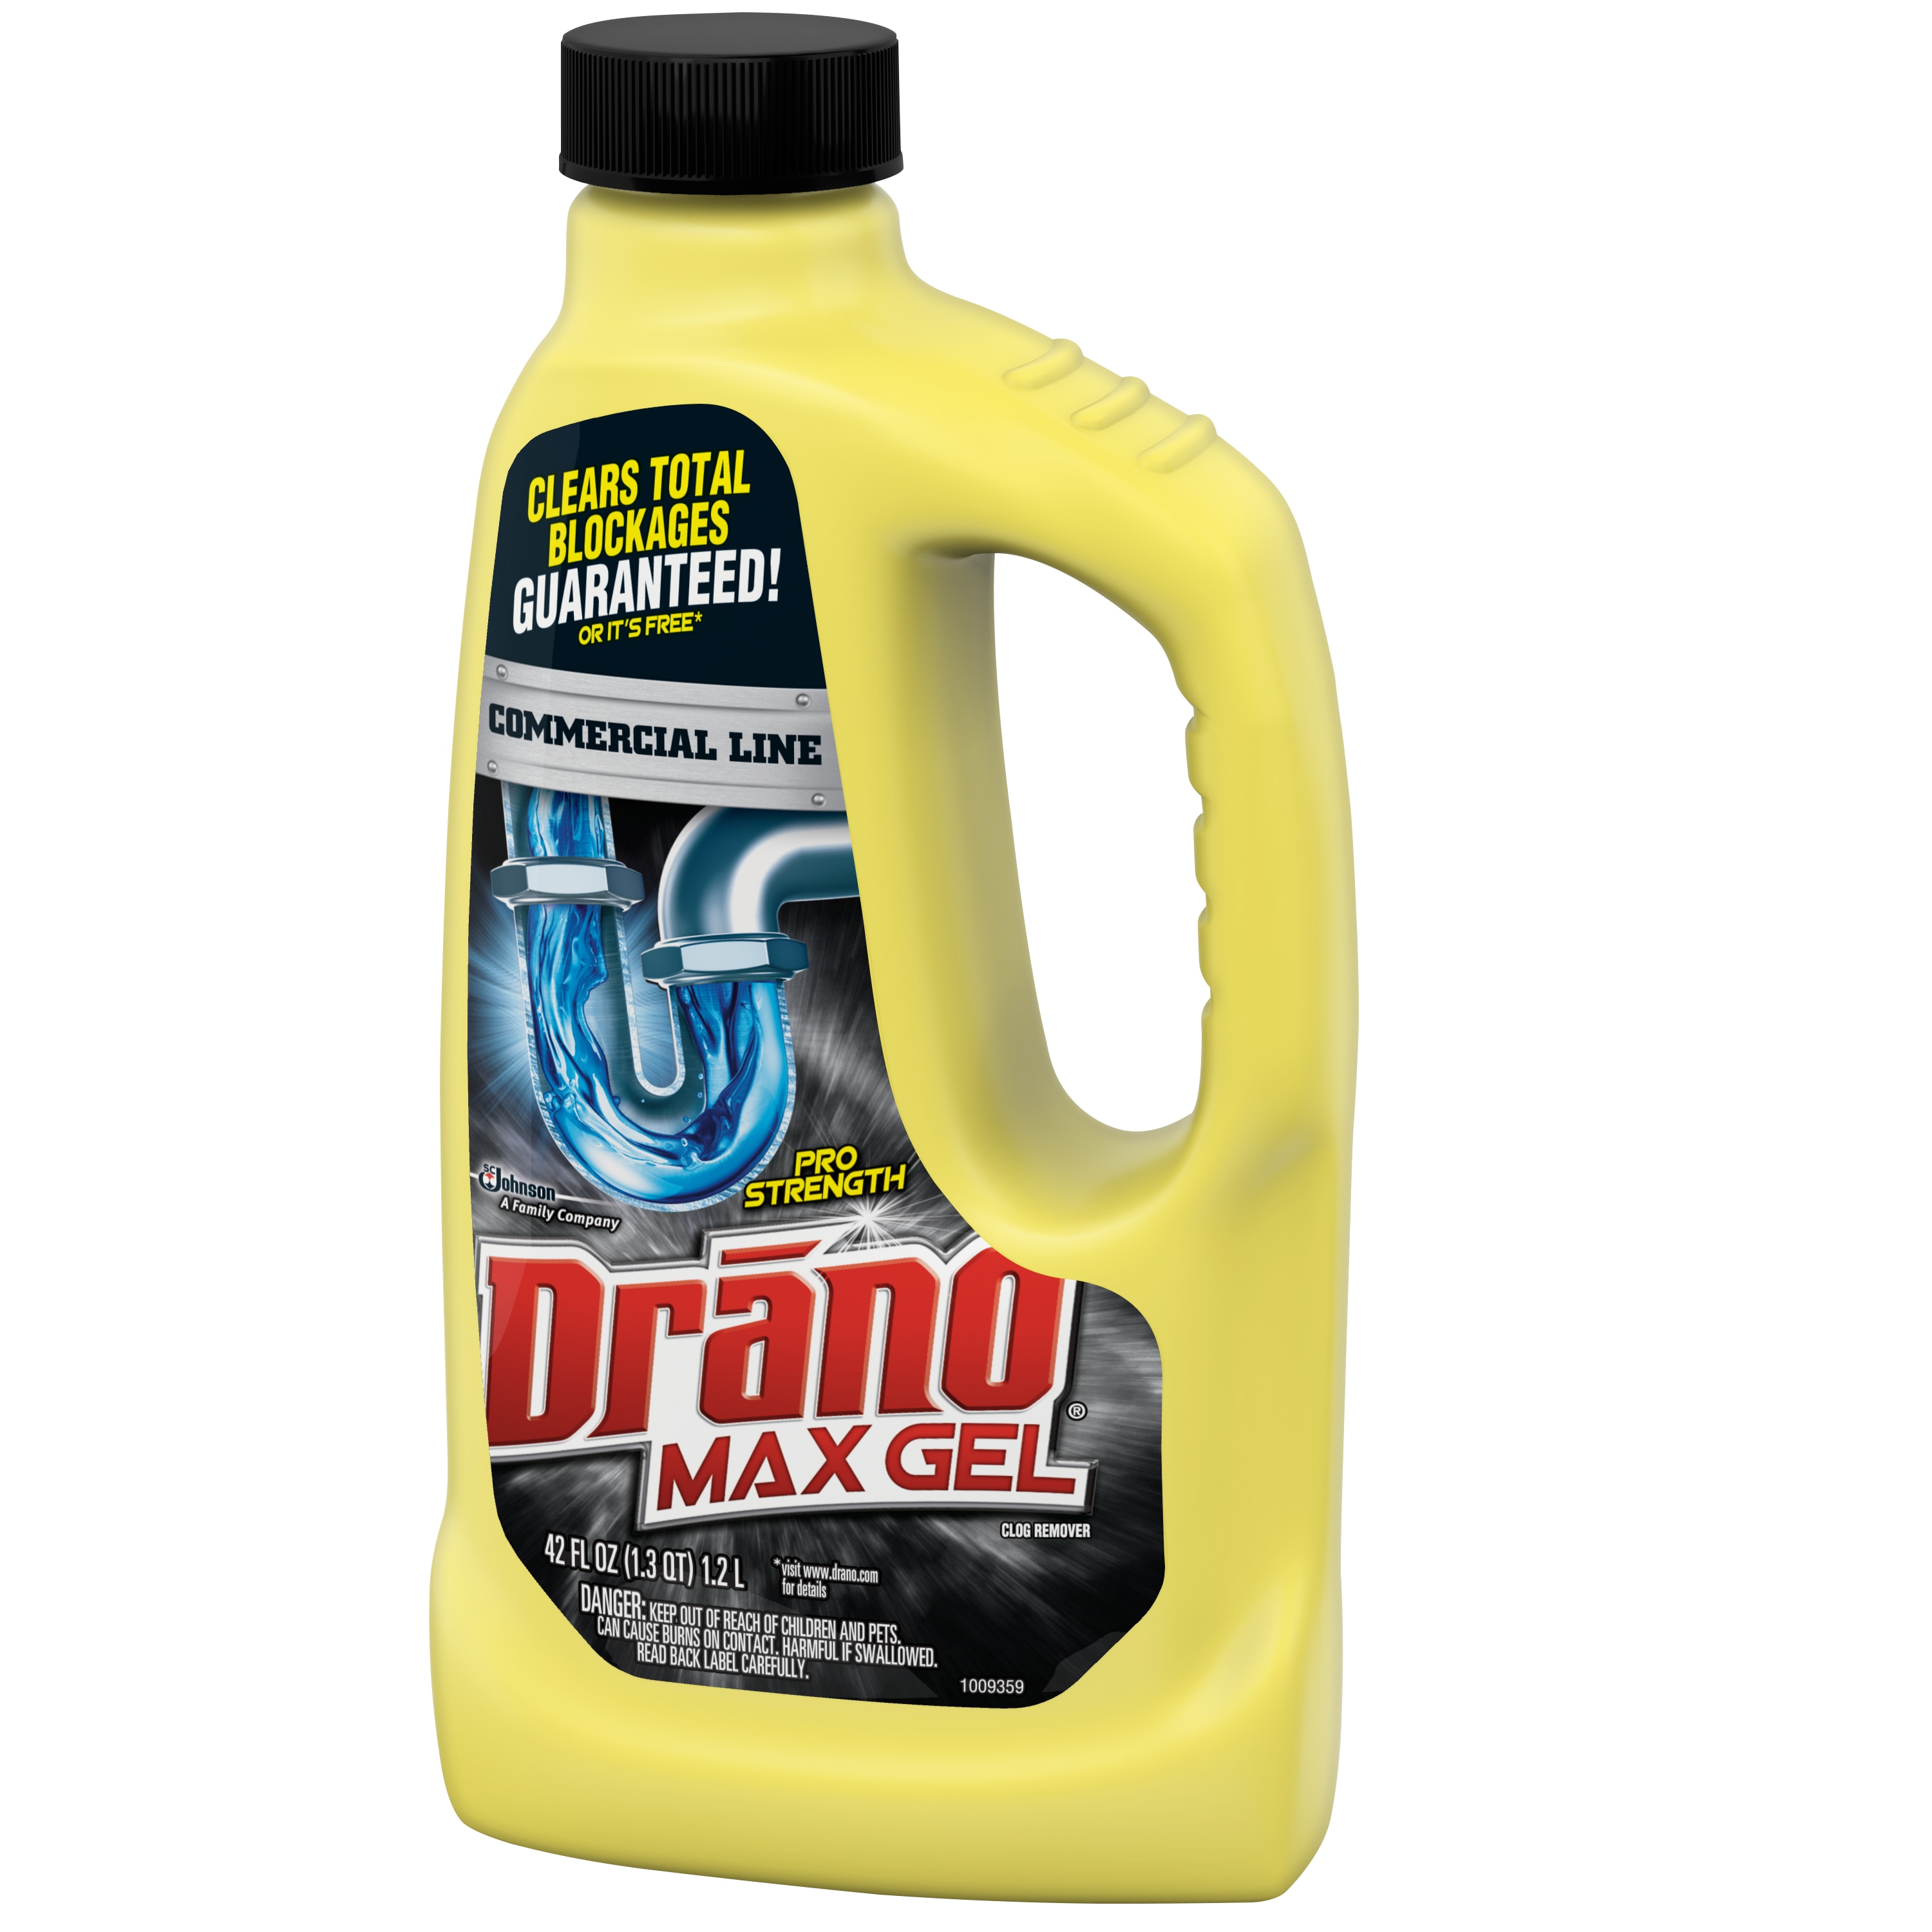 Drain Cleaners at Lowes.com